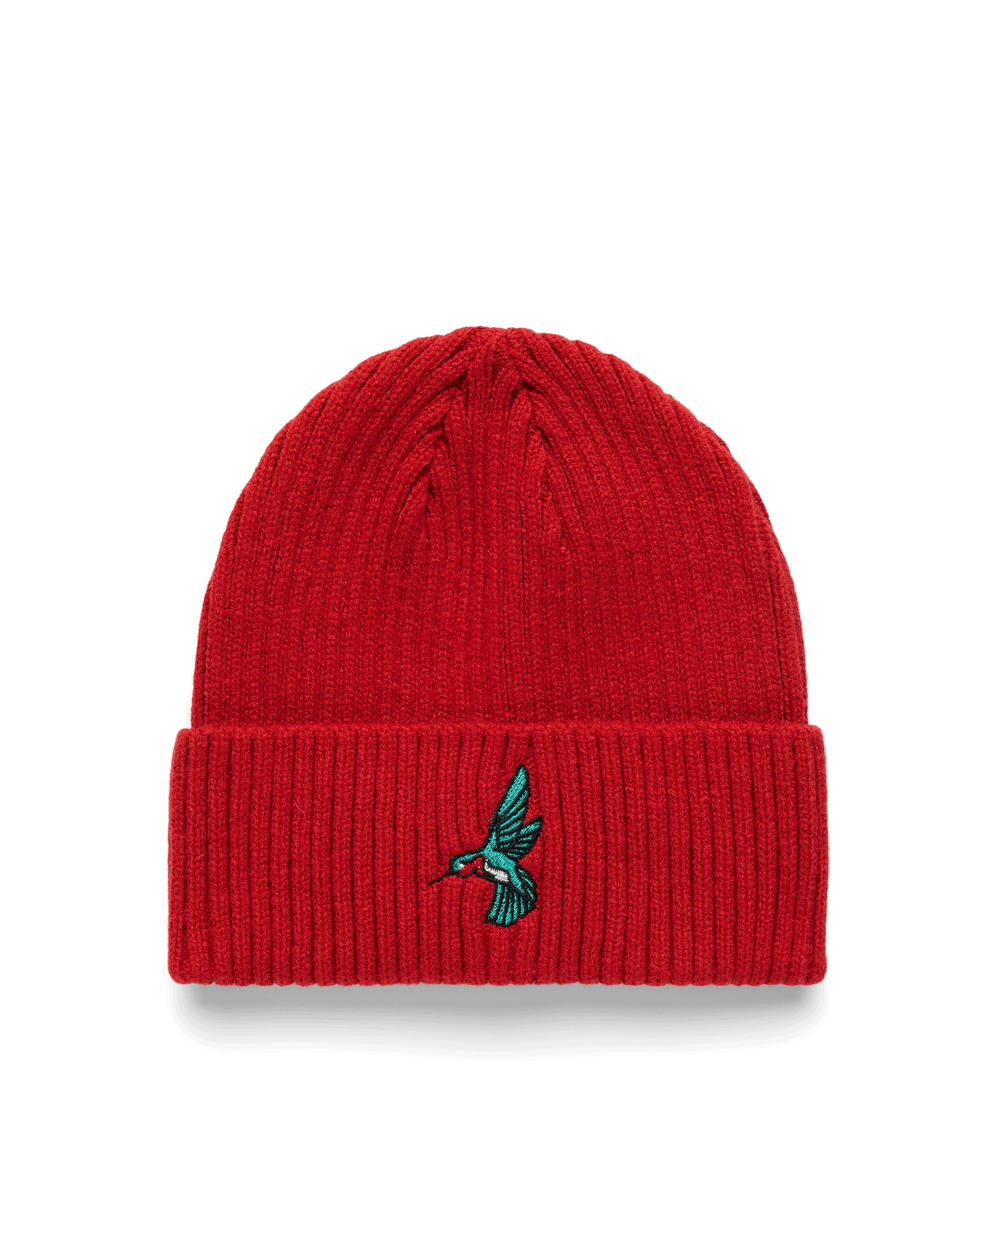 RIBBED BEANIE I HUMMINGBIRD EMBROIDERED | ARTISANAL RED